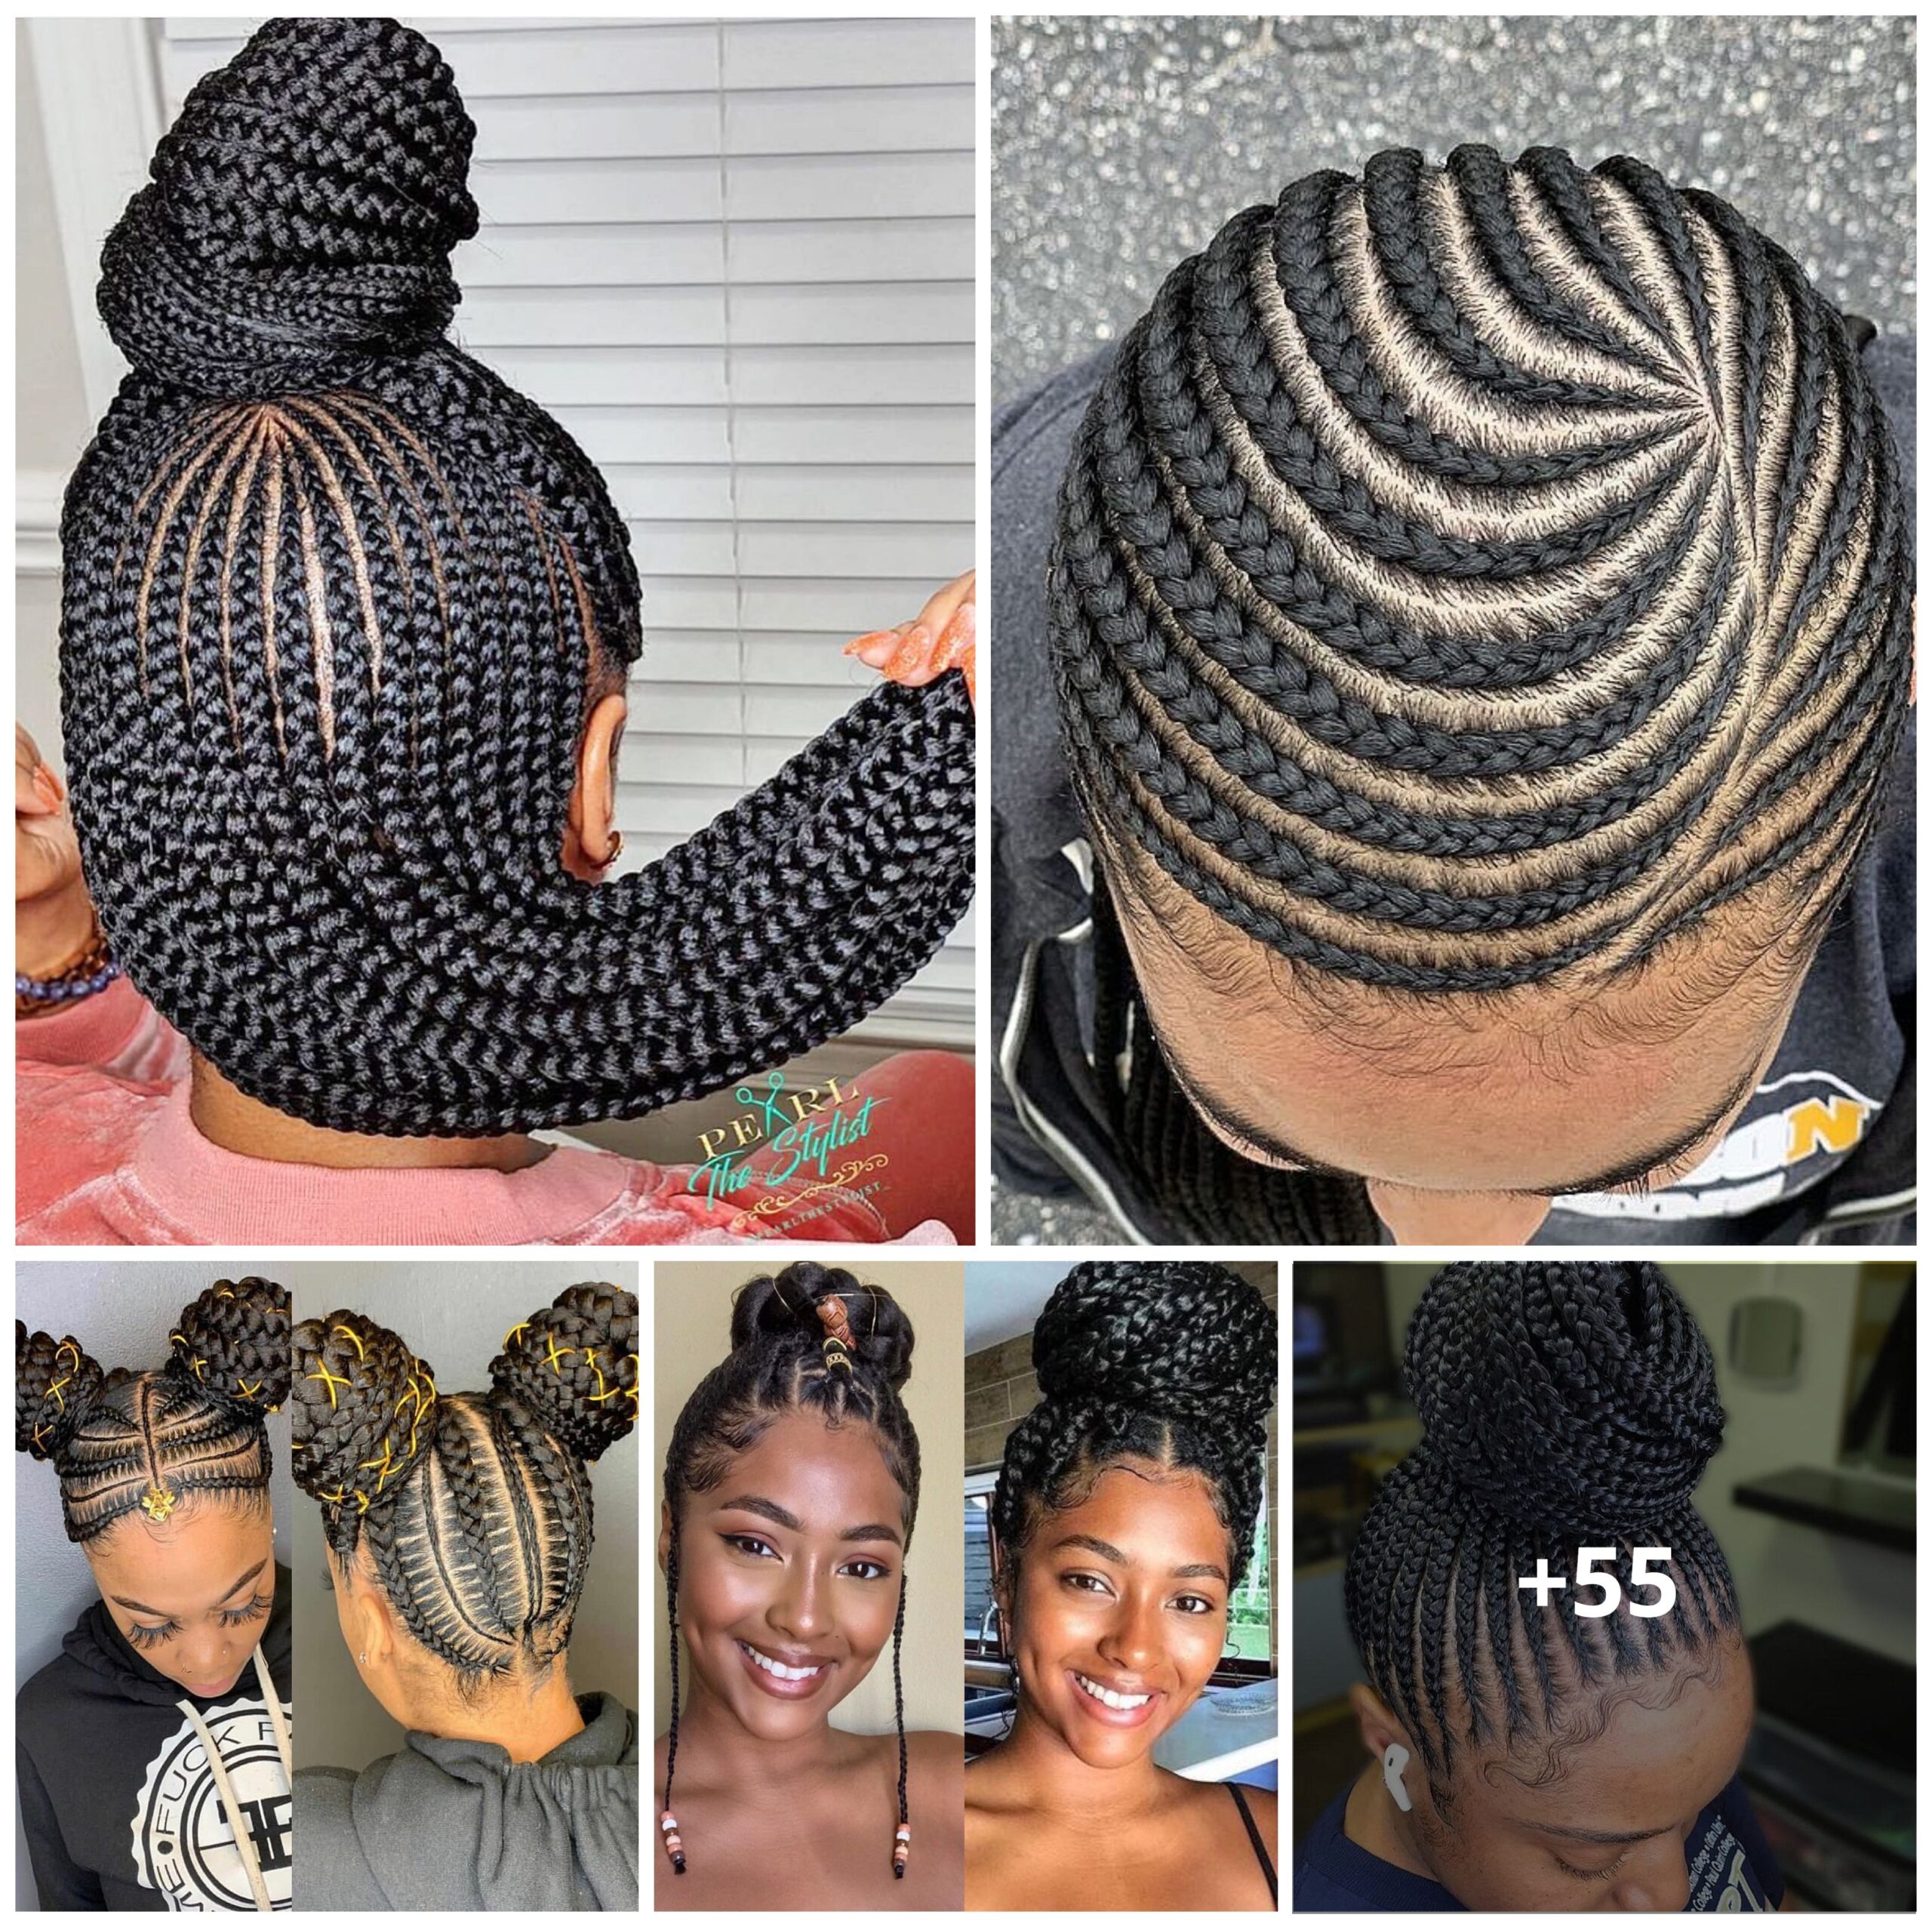 55+ Braided Hairstyles That Will Make You Suit Yourself